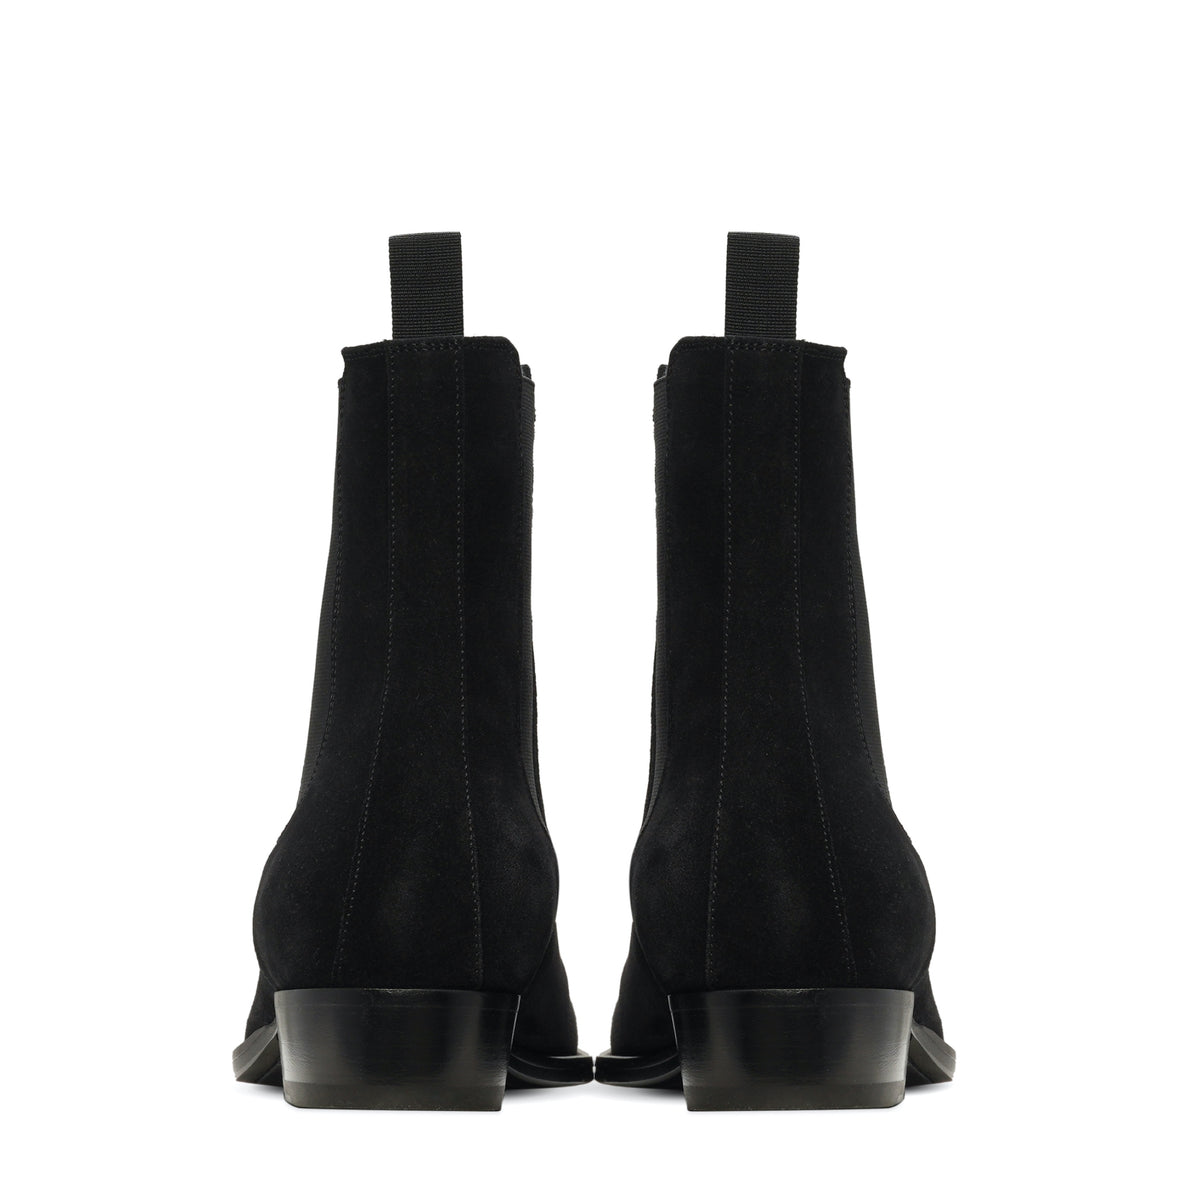 Unknown Articles Black Suede Chelsea Boot back of boot profile